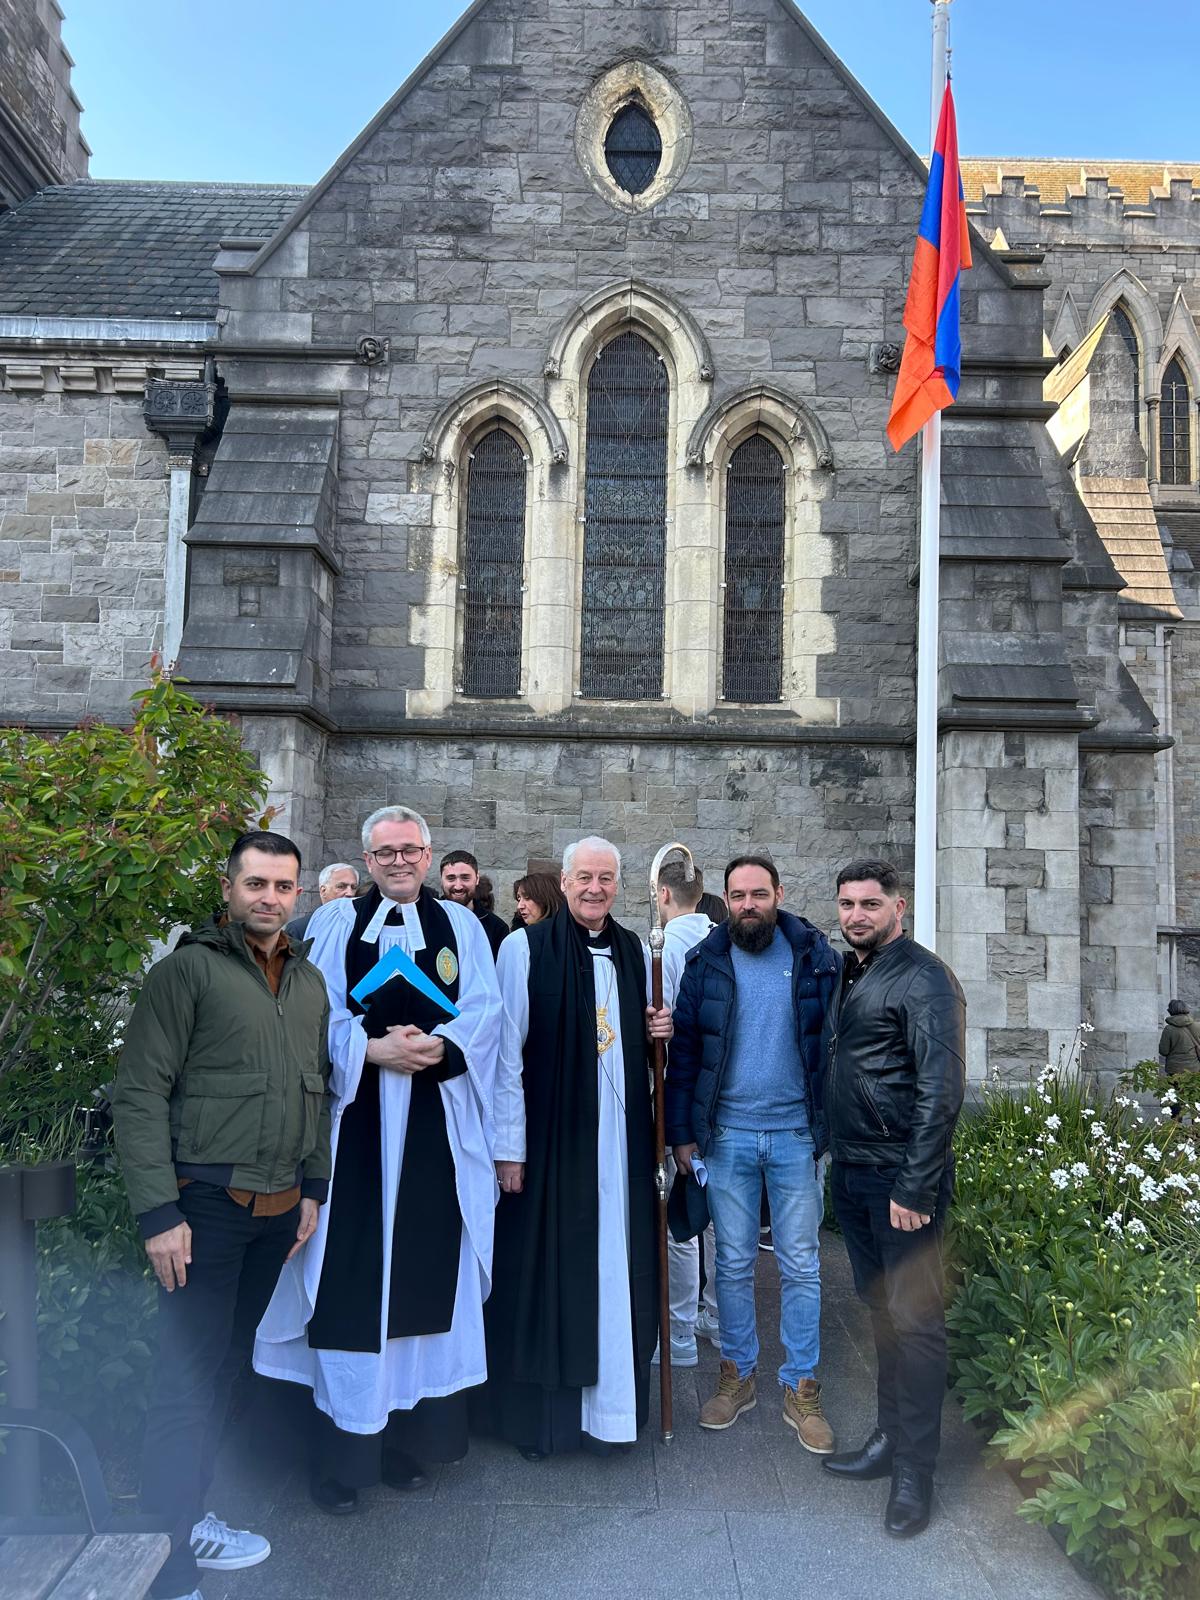 Members of the Armenian community including the sculptor who carved the Khachkar, Arta Hambarzumyan, following the commemoration service.